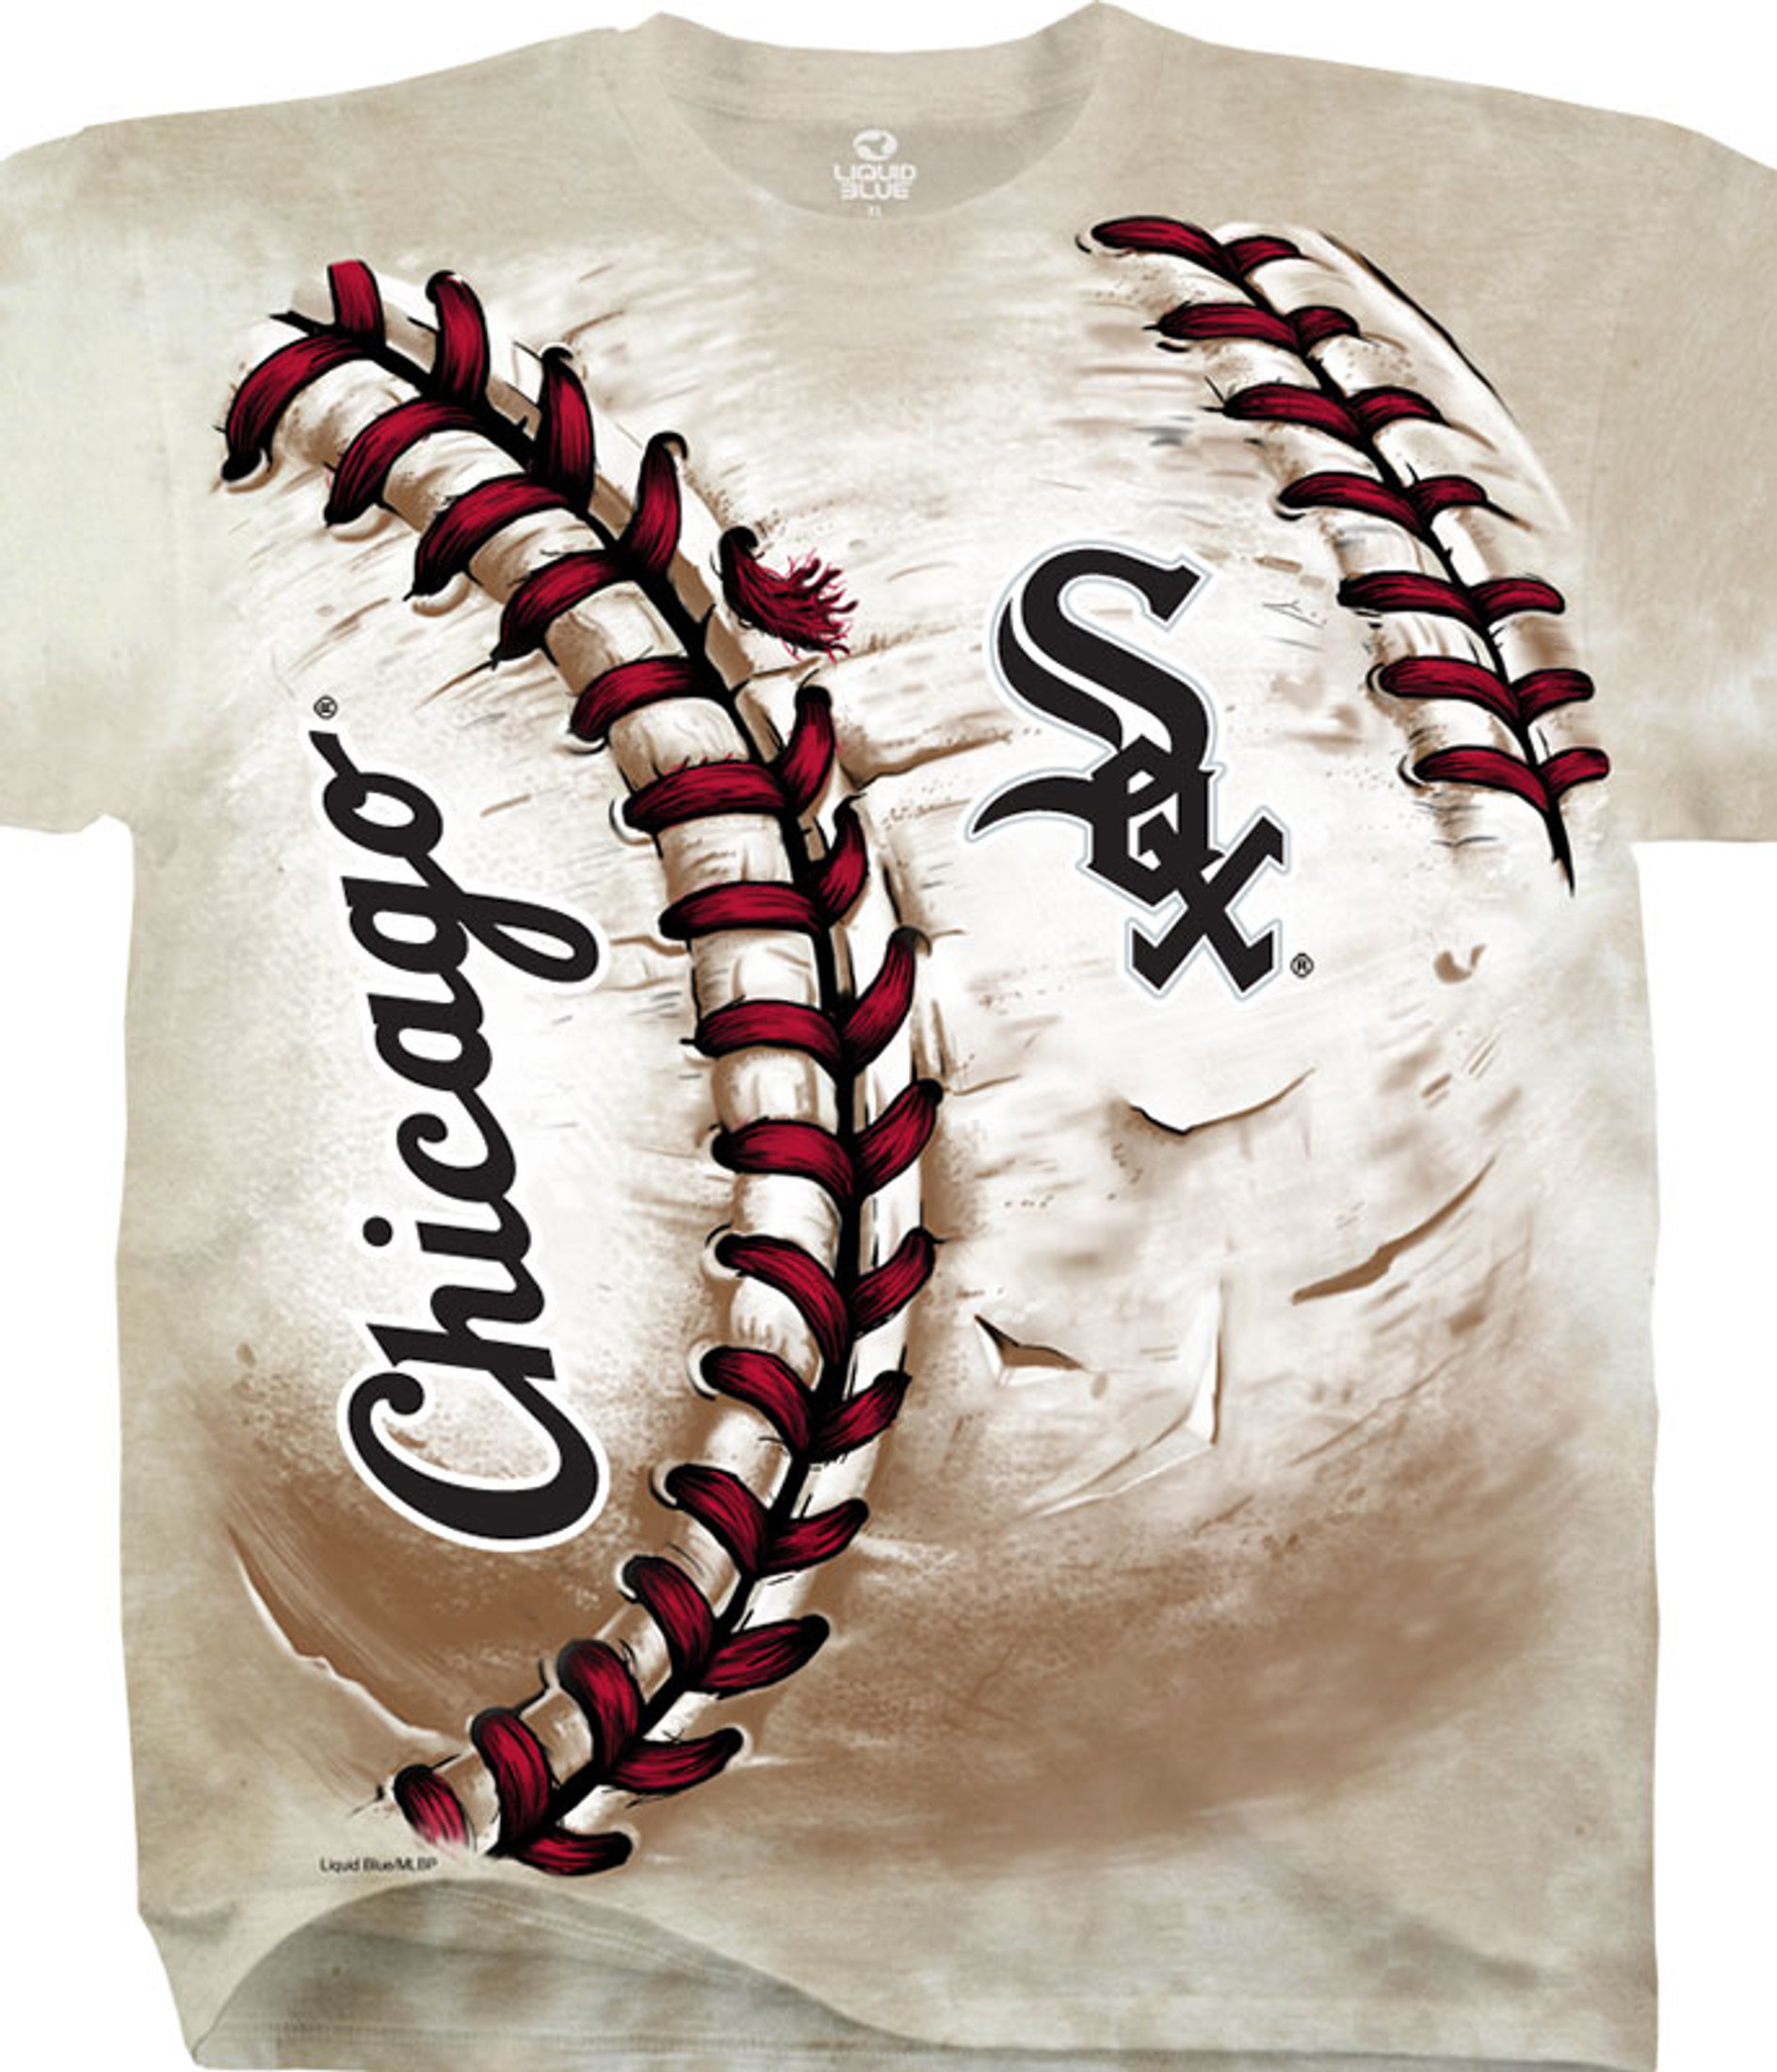 Chicago White Sox Blue MLB Jerseys for sale